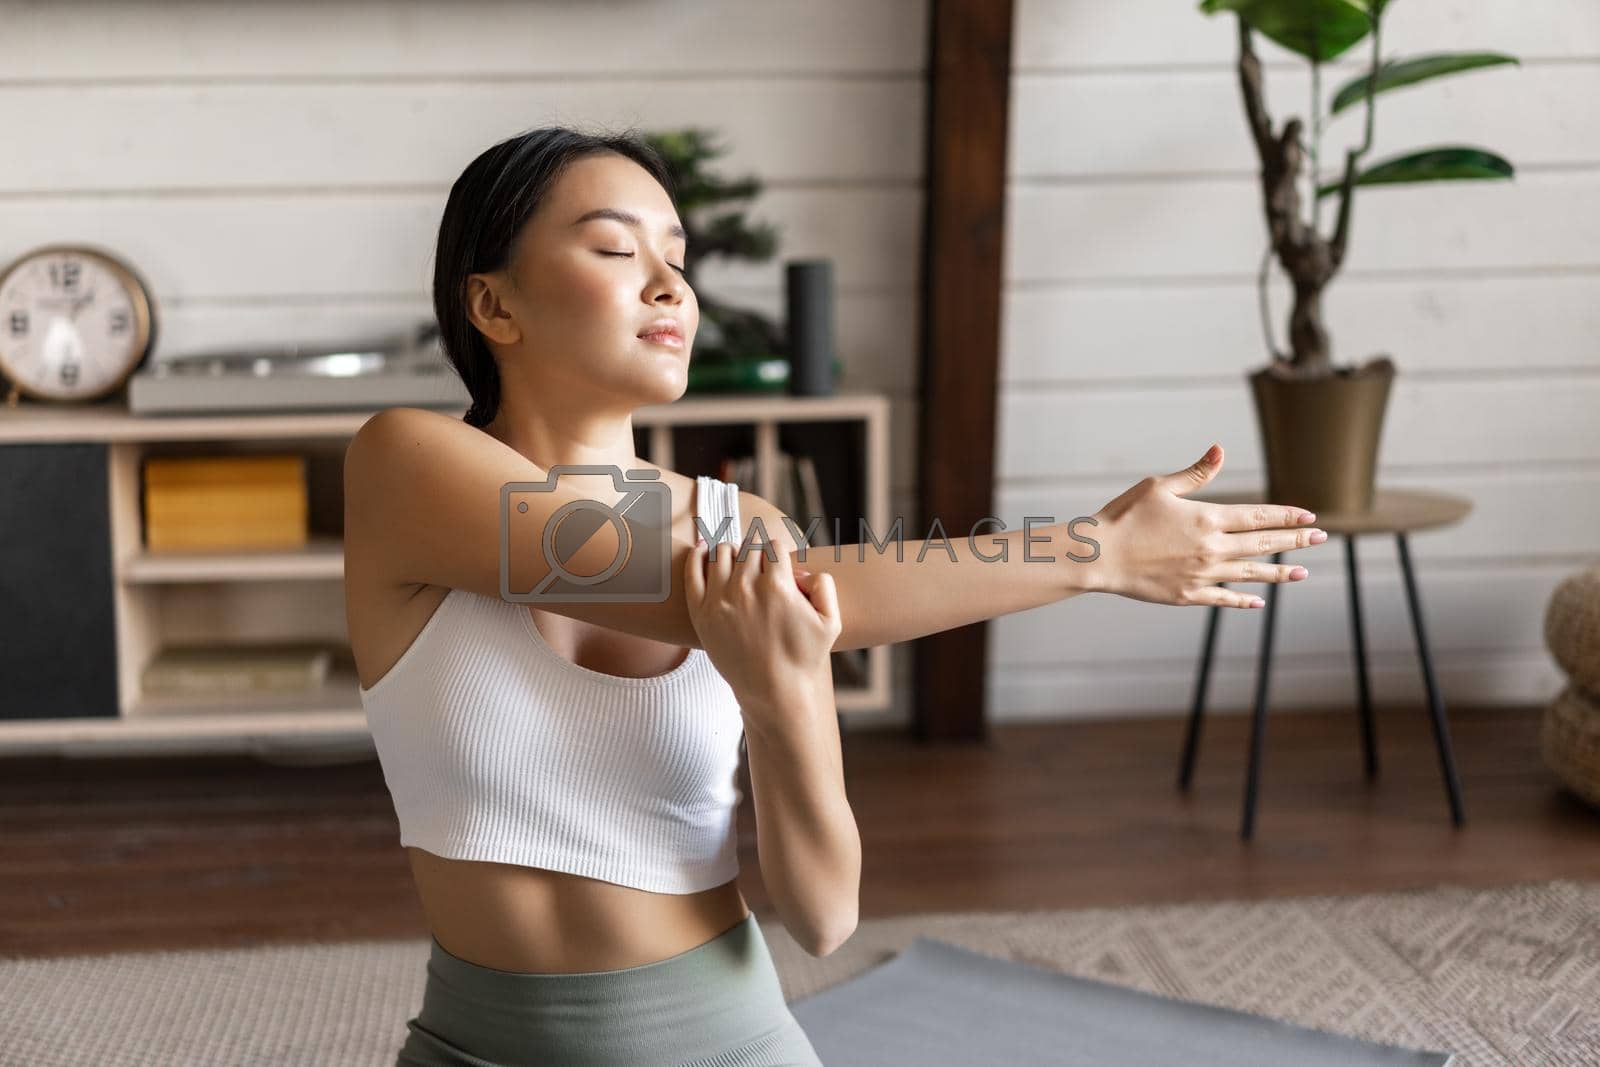 Smiling asian woman doing stretches, fitness workout at home in living room, wearing sport clothing.